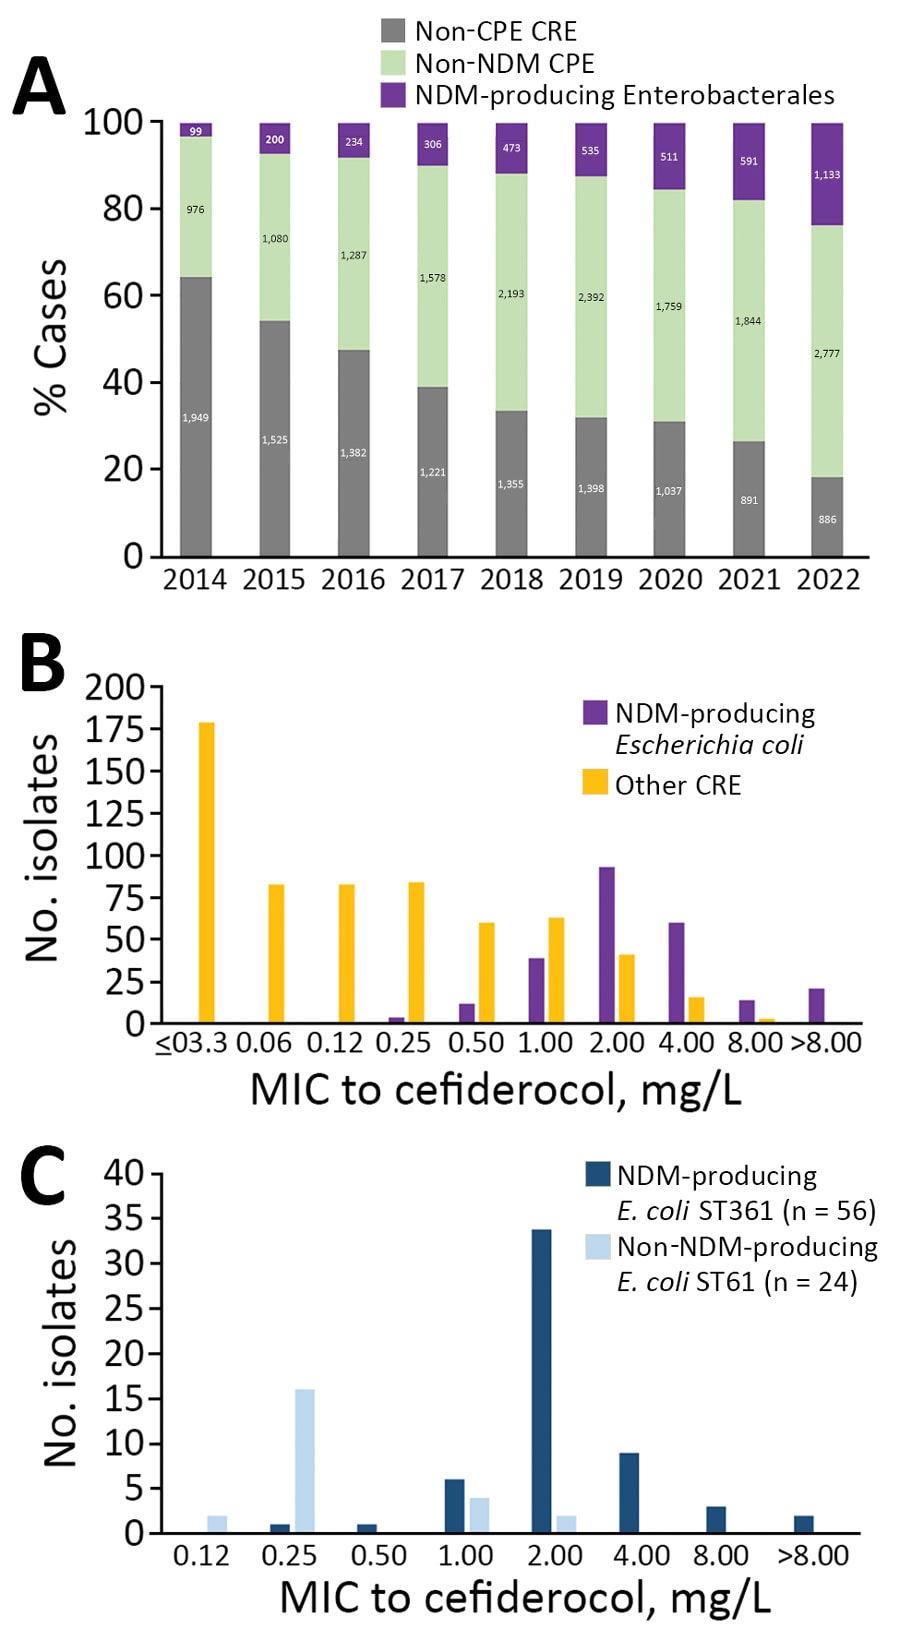 Evolution of NDM-producing and non–NDM-producing CPE observed in a population analysis of Escherichia coli ST361 and reduced cefiderocol susceptibility, France. A) Evolution of non-CPE CRE, non-NDM CRE, and non–NDM-producing Enterobacterales sent to the French National Reference Center for Antimicrobial Resistance during 2014–2022. B) Distribution of cefiderocol MICs in all (n = 856) CRE isolates collected during the study, July 1, 2021–June 30, 2022. C) Distribution of cefiderocol MICs in all (n = 80) E. coli ST361 isolates from the French National Reference Center for Antimicrobial Resistance collection, 2015–2022. CPE, carbapenemase-producing Enterobacterales; CRE, carbapenem-resistant Enterobacterales; NDM, New Delhi metallo-β-lactamase; non-CPE, non–carbapenemase producing; non-NDM CPE, non–NDM carbapenemase-producing Enterobacterales; ST, sequence type.